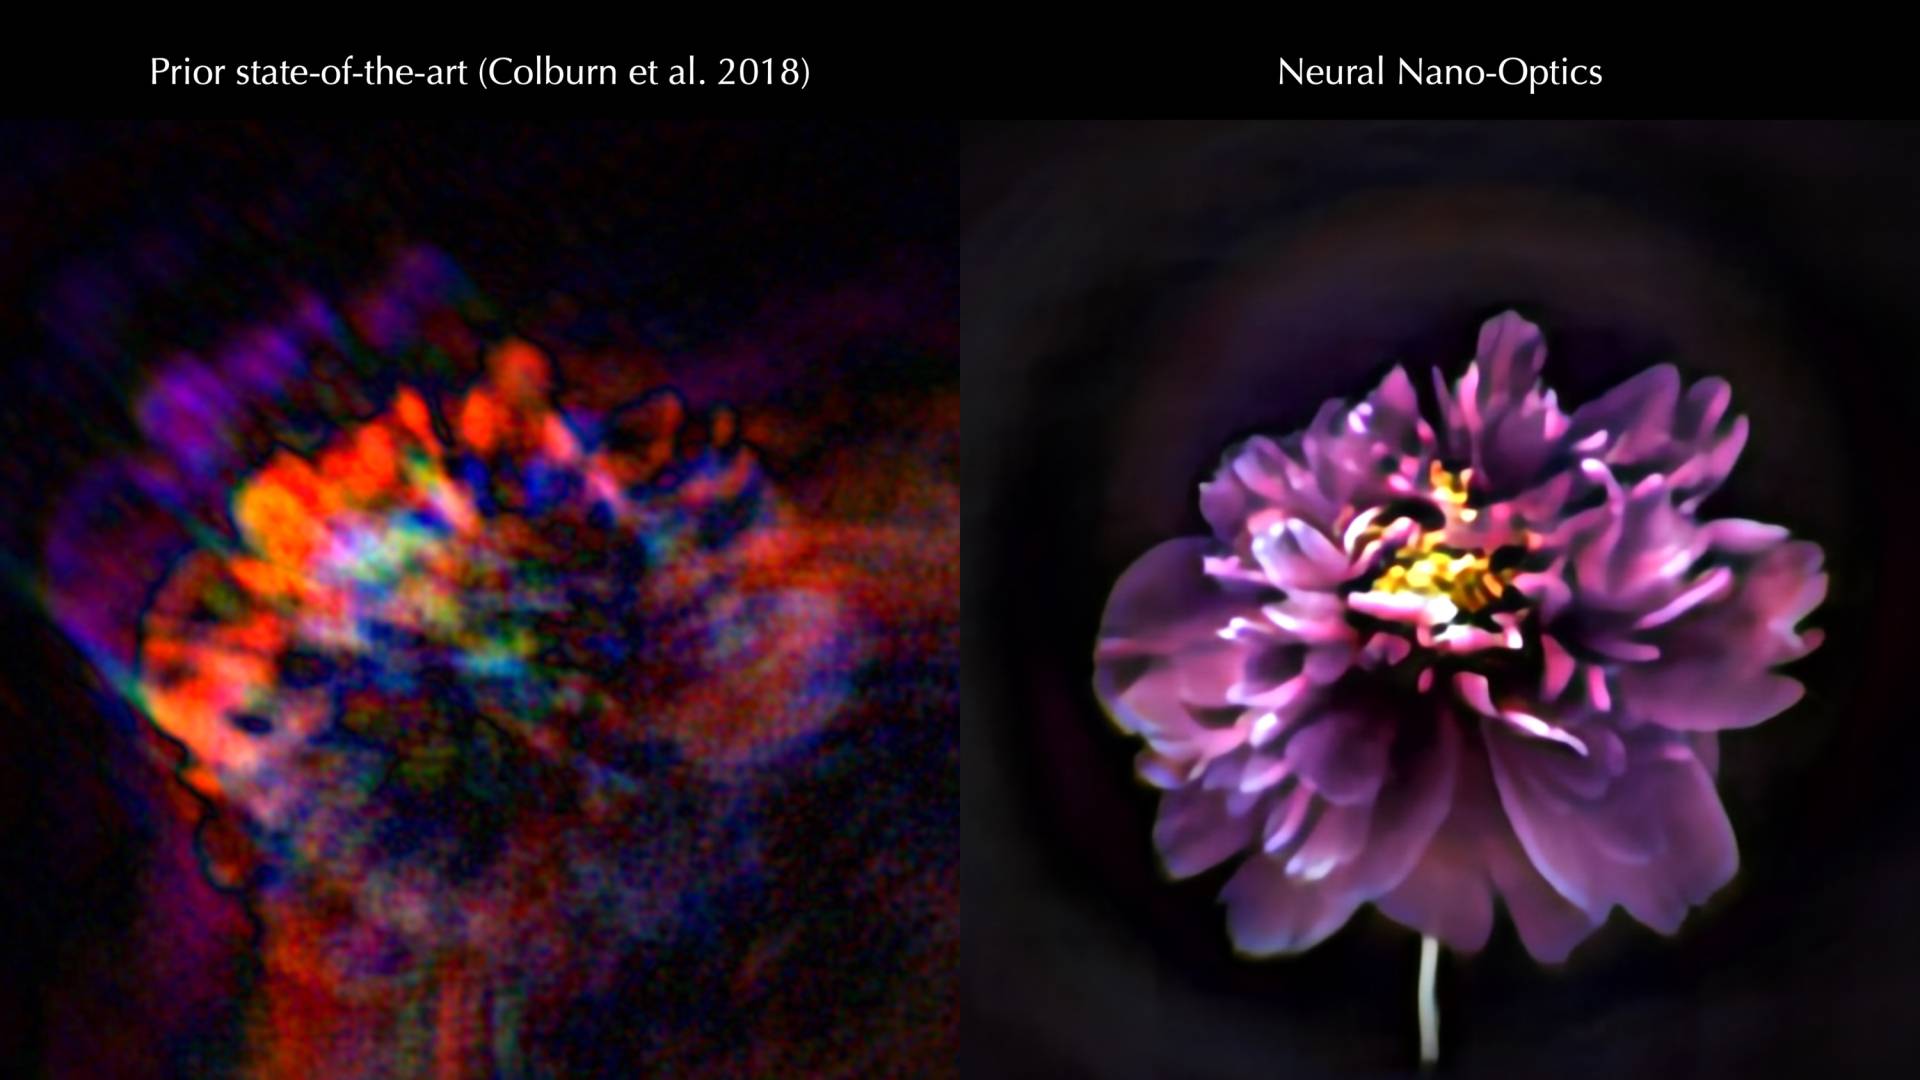 Two flowers show prior state-of-the-art (Colburn et al. 2018) versus the improved image from Neural Nano-Optics.